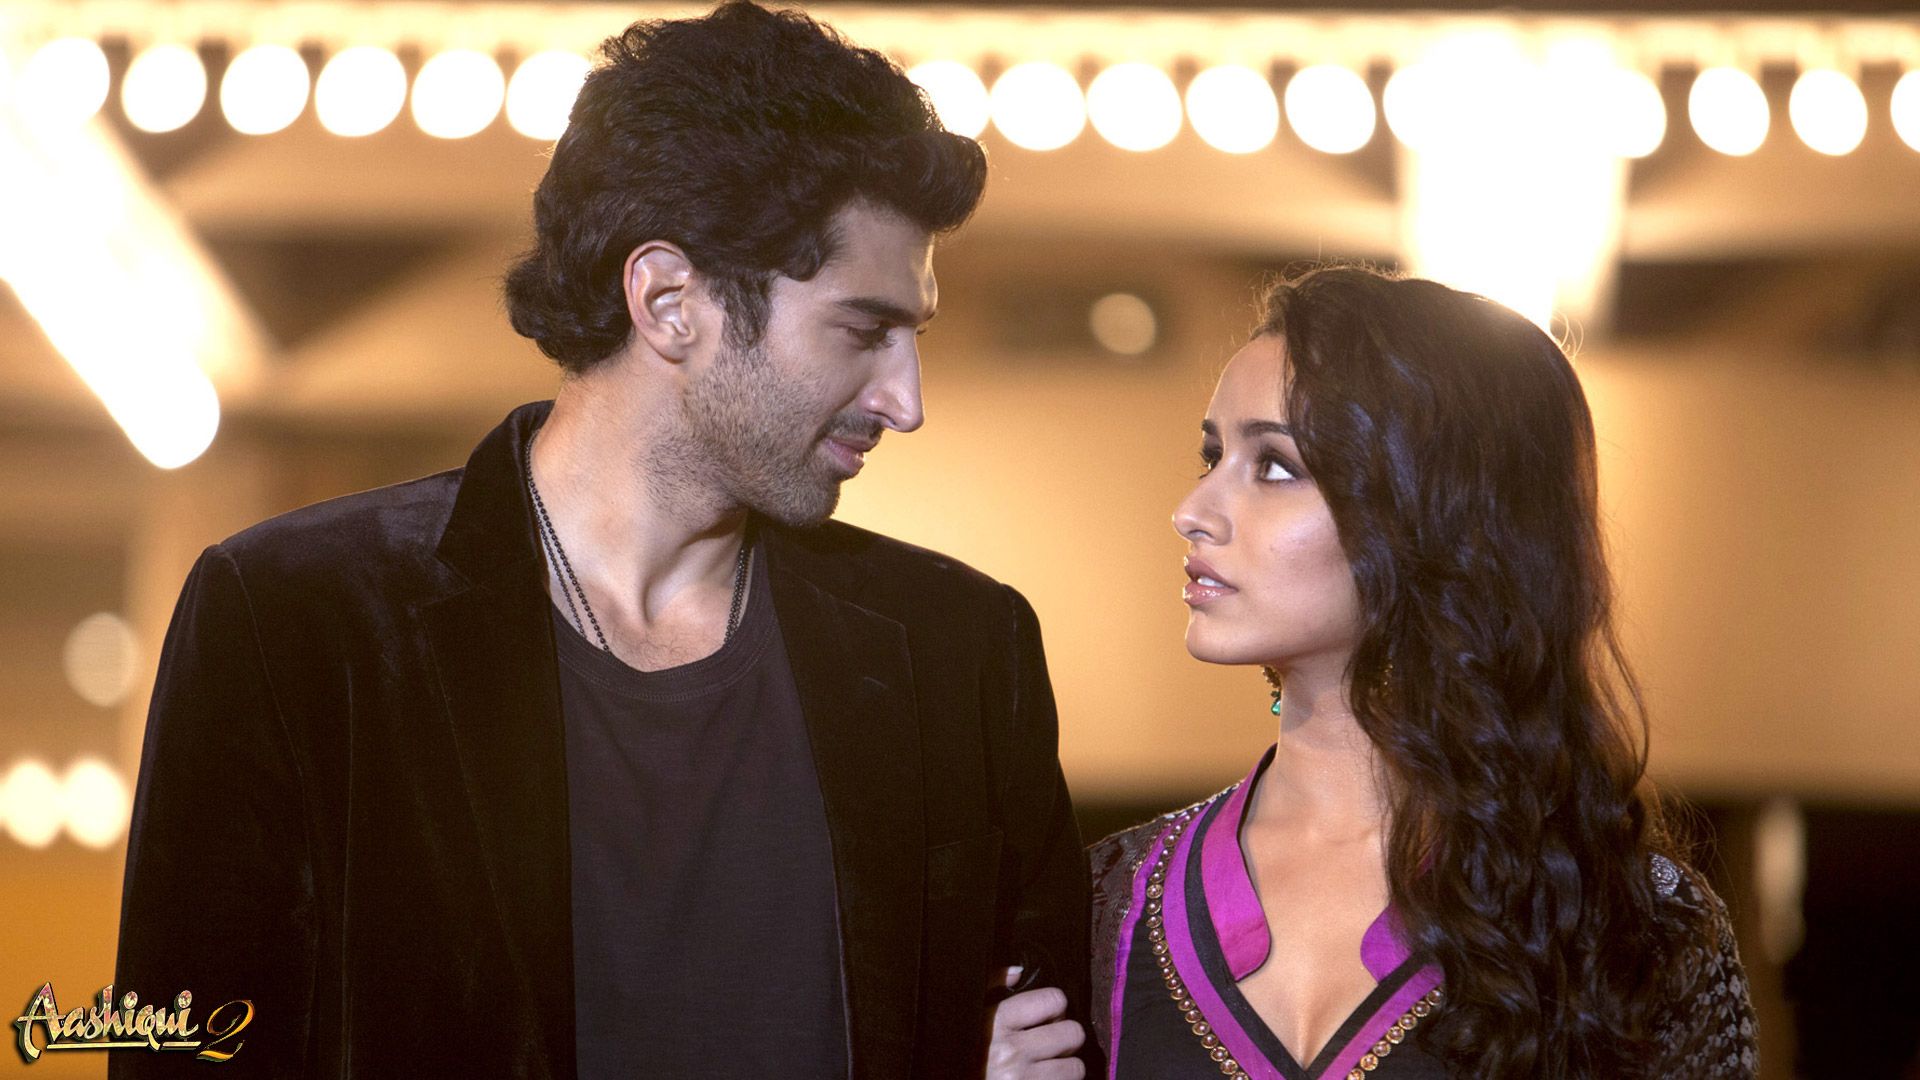 Love Scene From Aashiqui 2 HD Bollywood Movies Wallpapers for